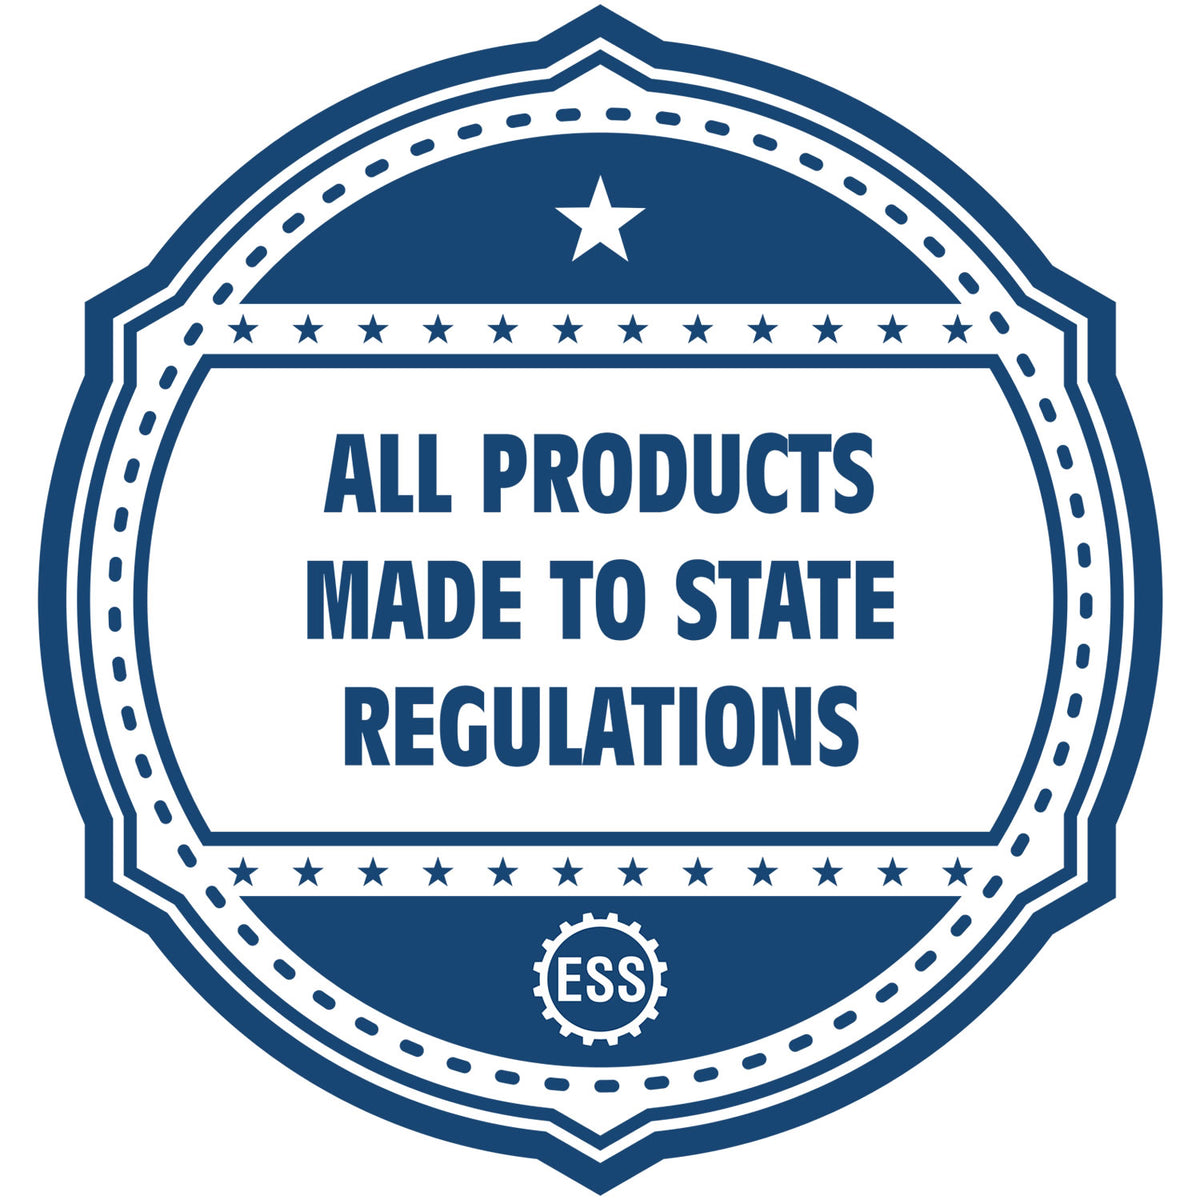 An icon or badge element for the Self-Inking Rectangular Missouri Notary Stamp showing that this product is made in compliance with state regulations.